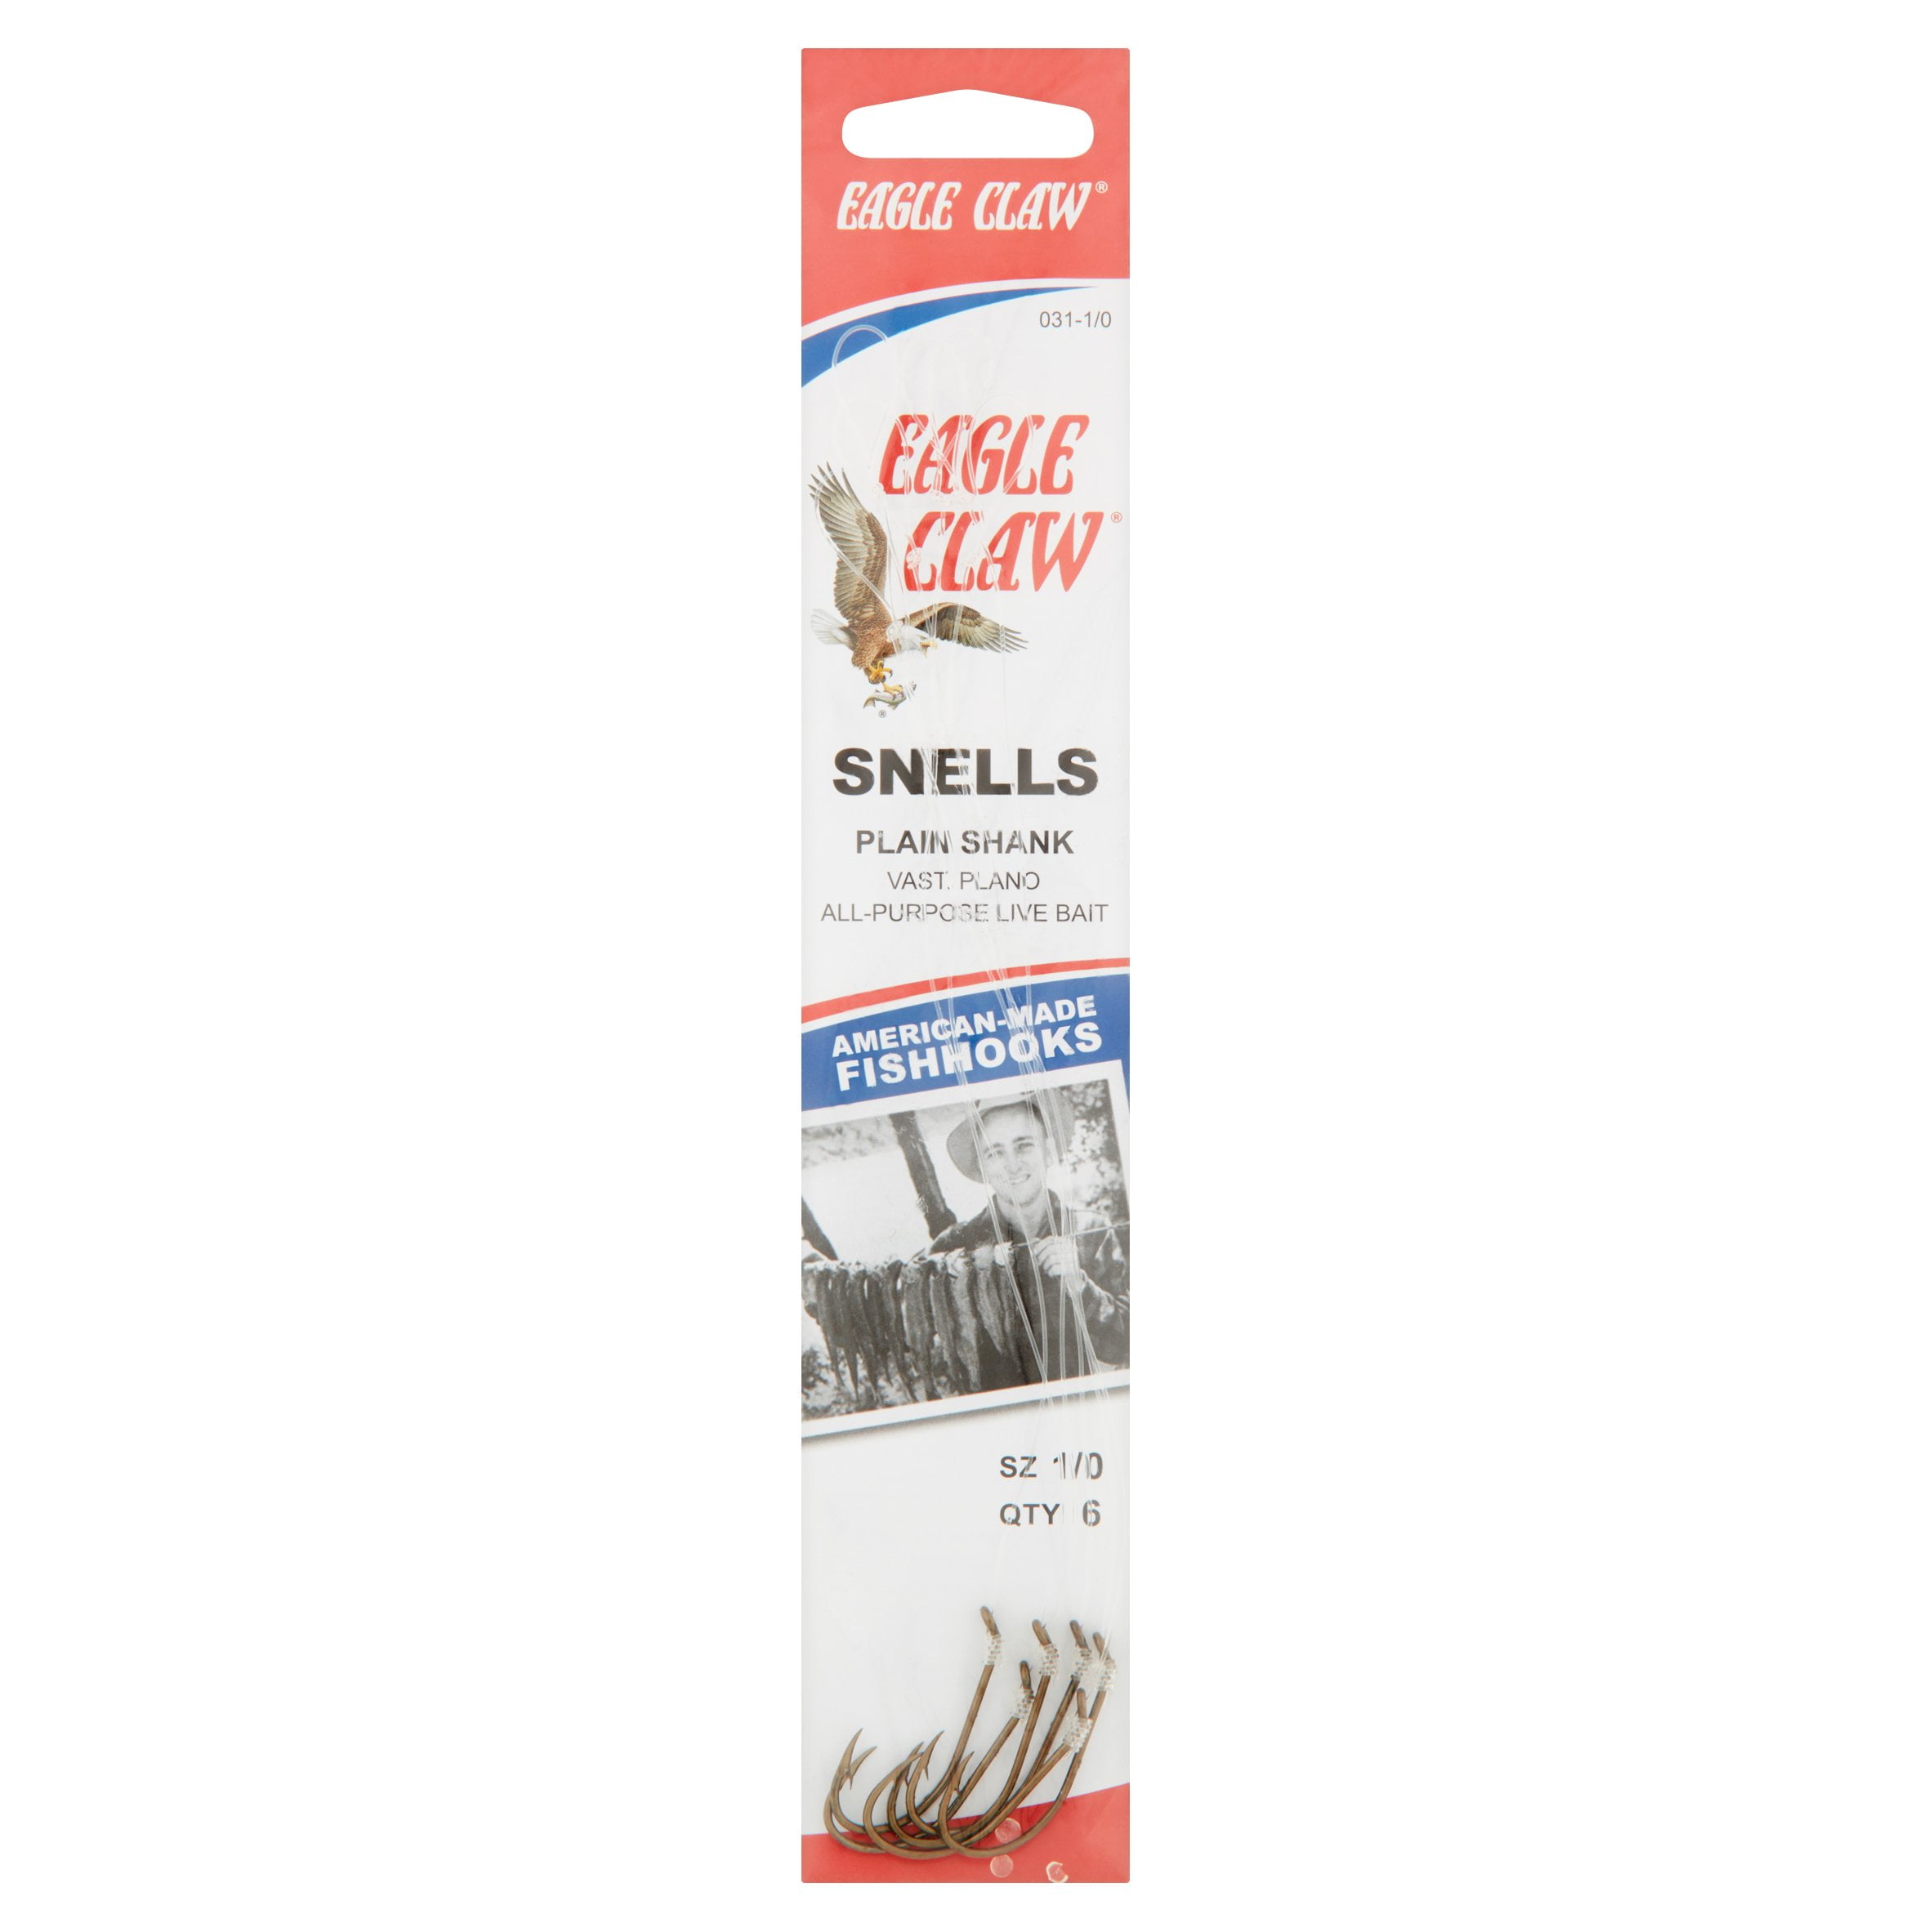 Eagle Claw 031H-8 Plain Shank Snell Fish Hook, Size 8 